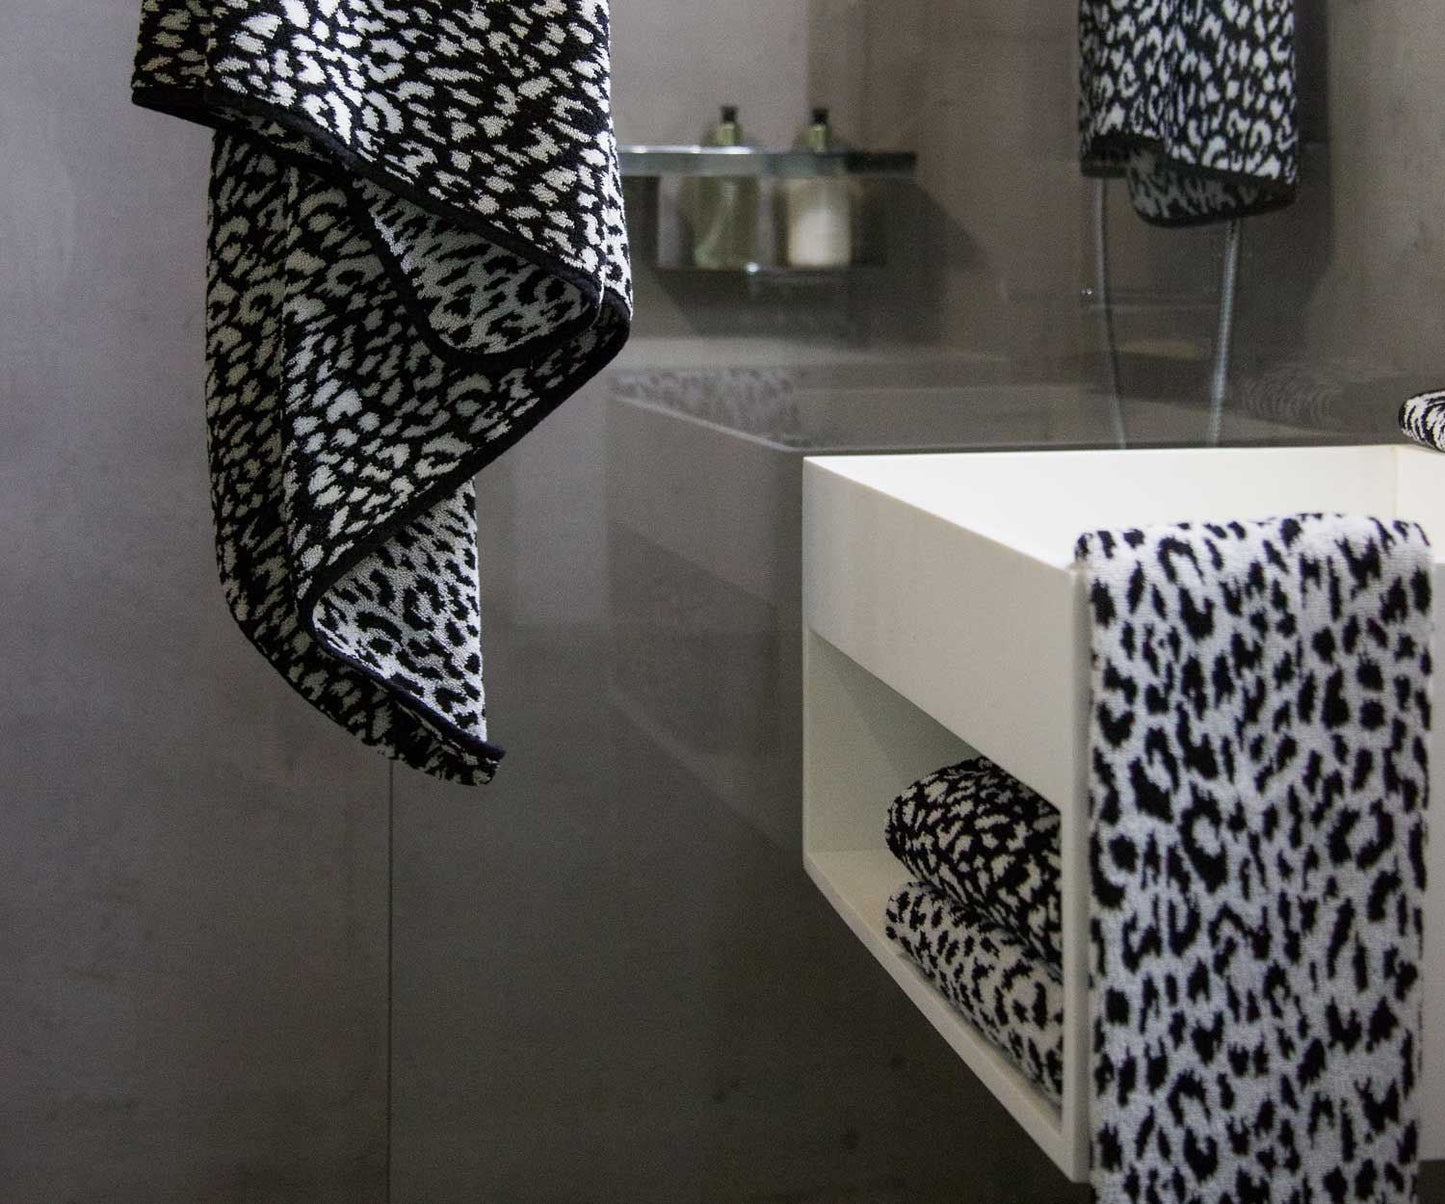 Animal Print Zimba Towels by Abyss & Habidecor / Black - |VESIMI Design| Luxury and Rustic bathrooms online